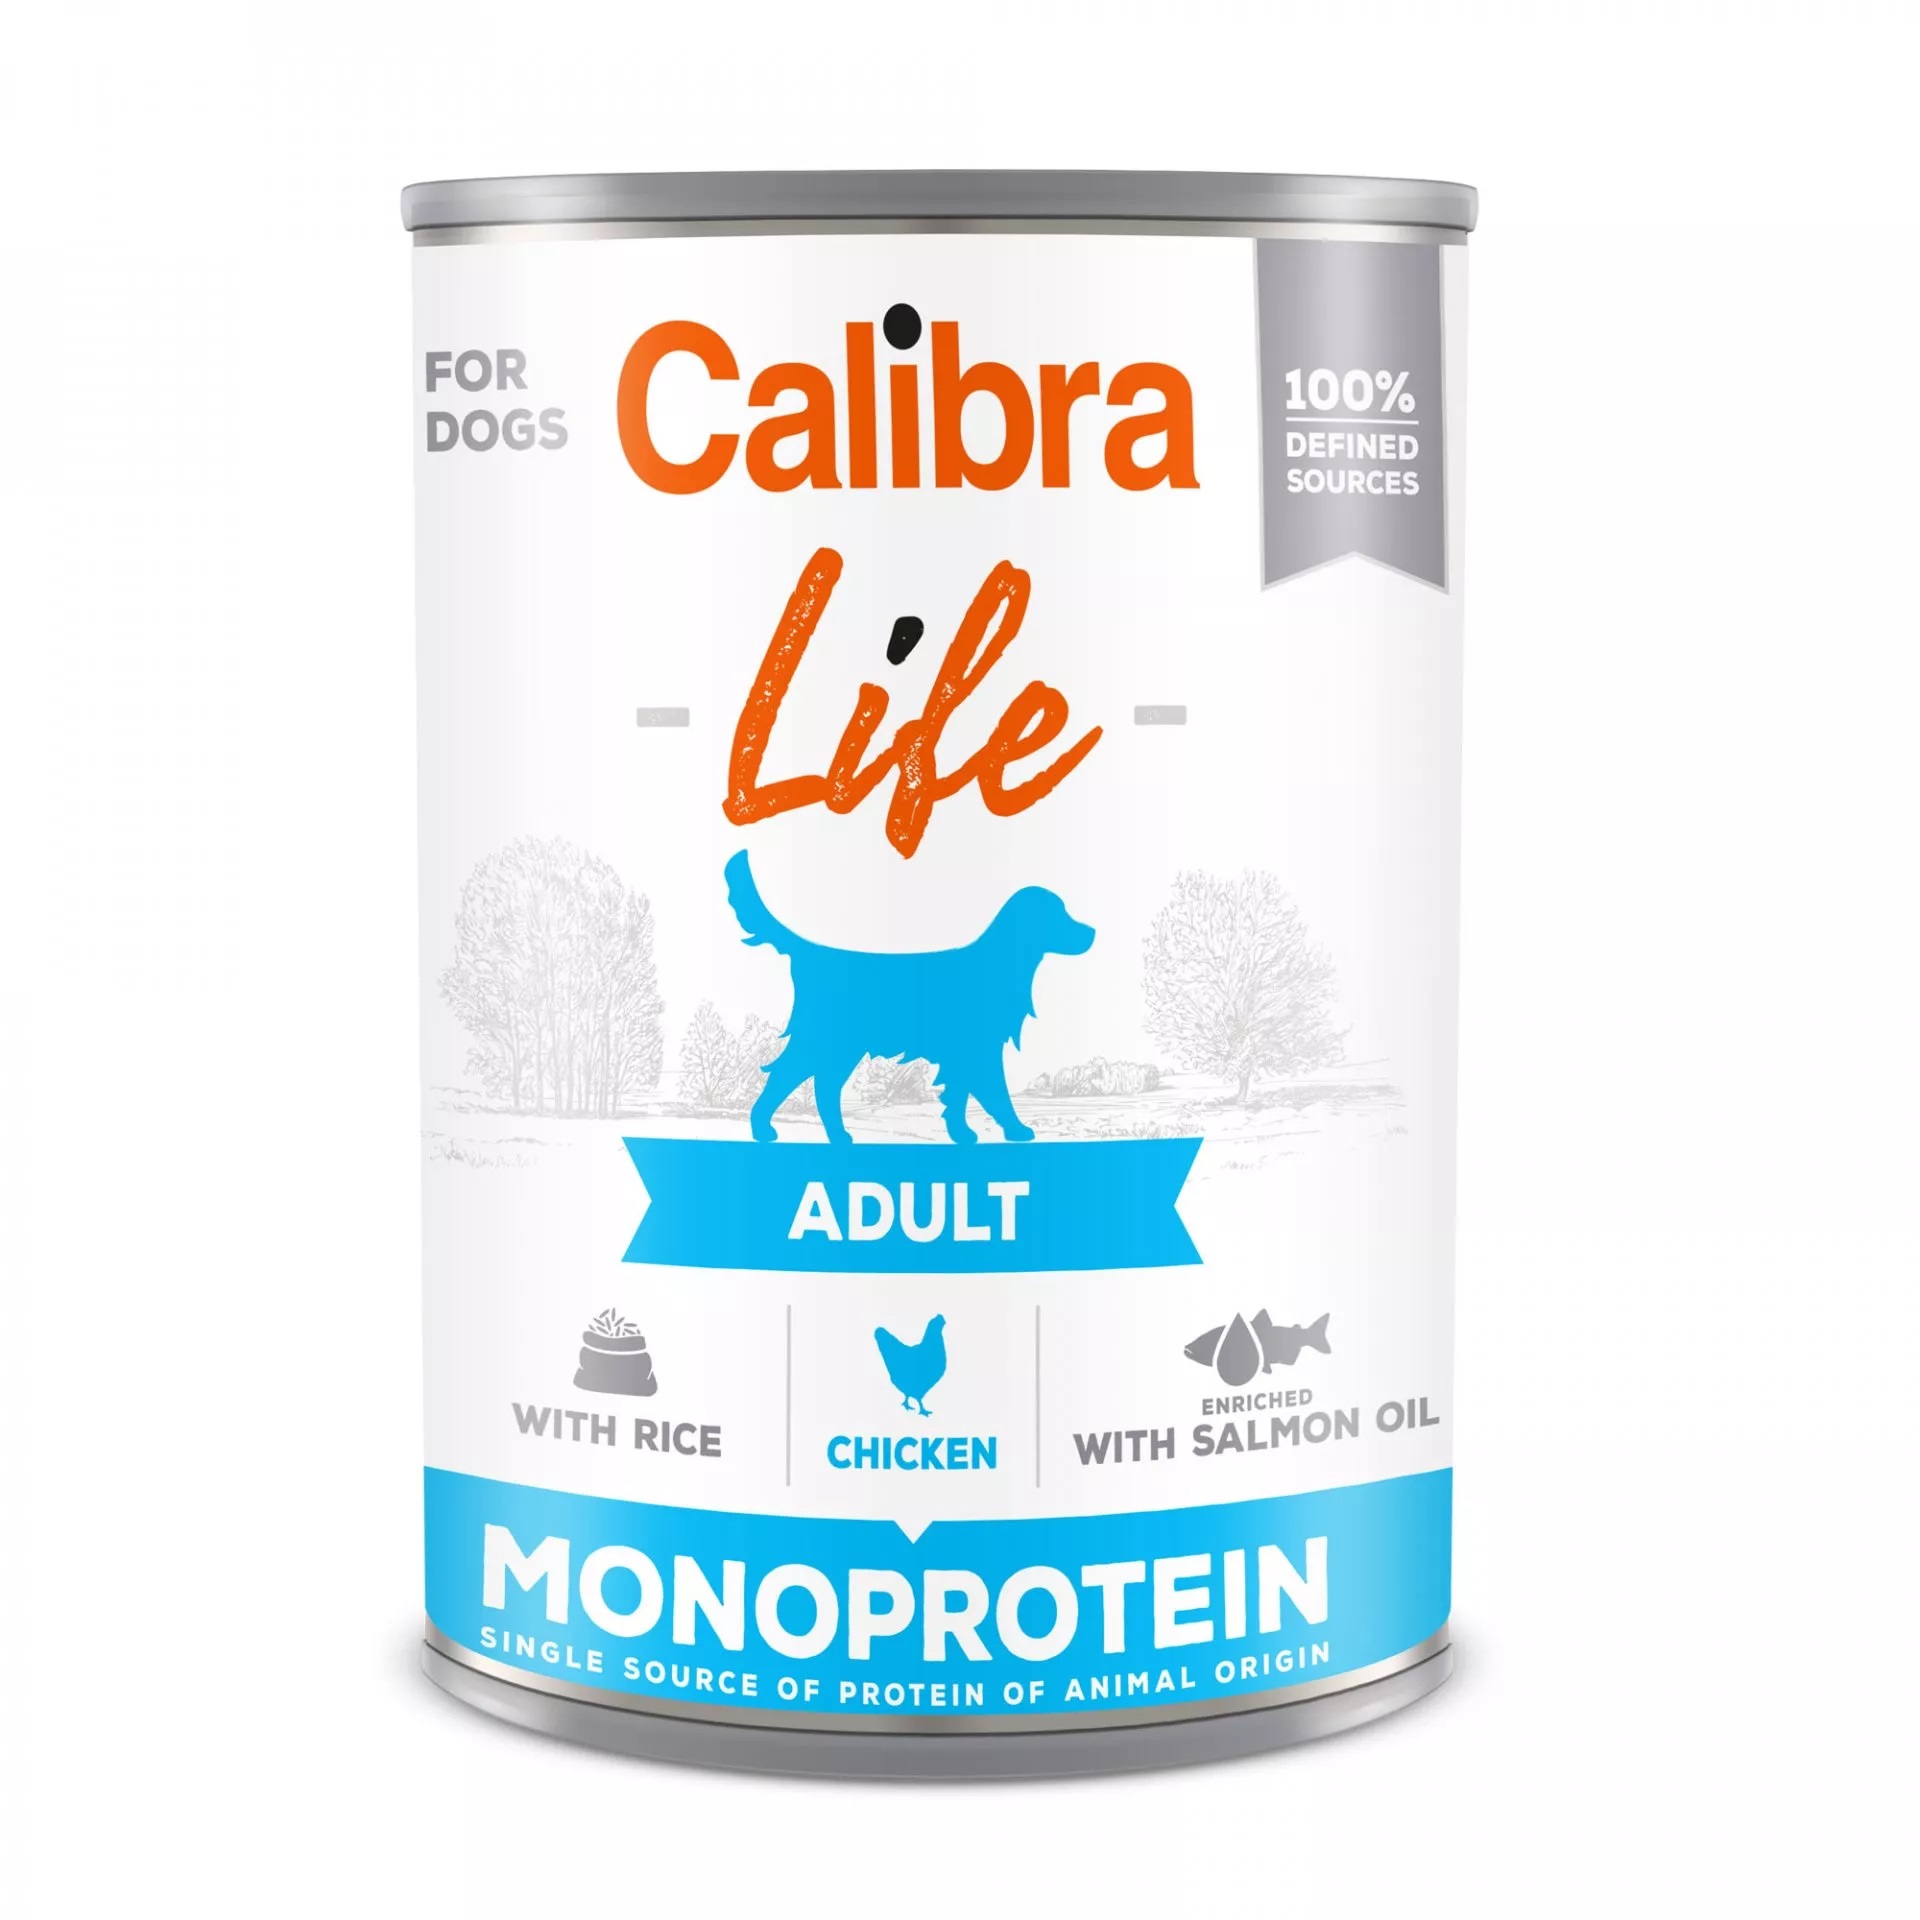 Calibra Dog Life - Adult Chicken with rice - 400g